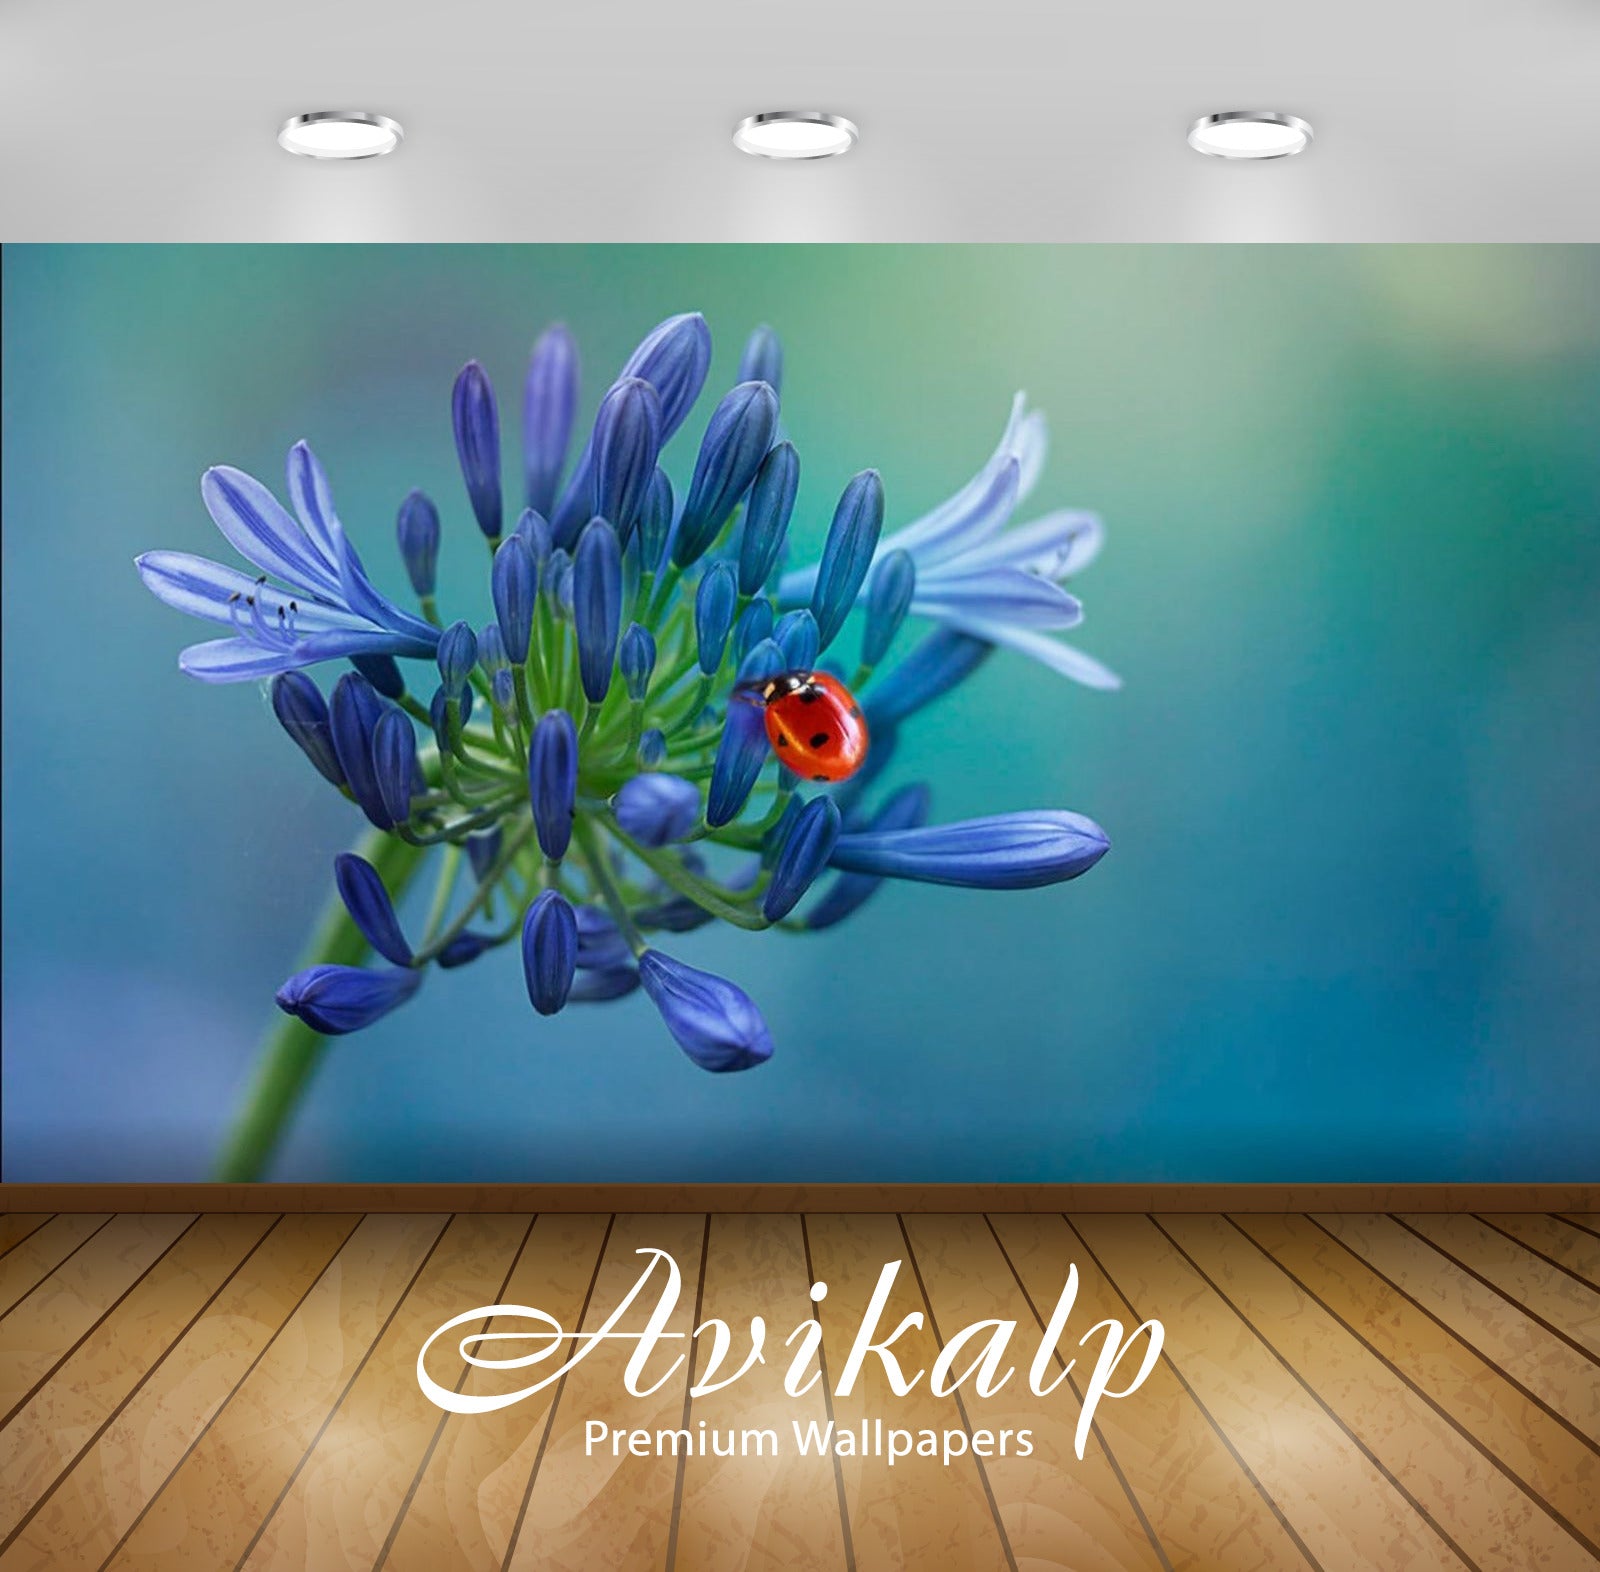 Avikalp Exclusive Awi2939 Red Ladybug On A Blue Flower Full HD Wallpapers for Living room, Hall, Kid